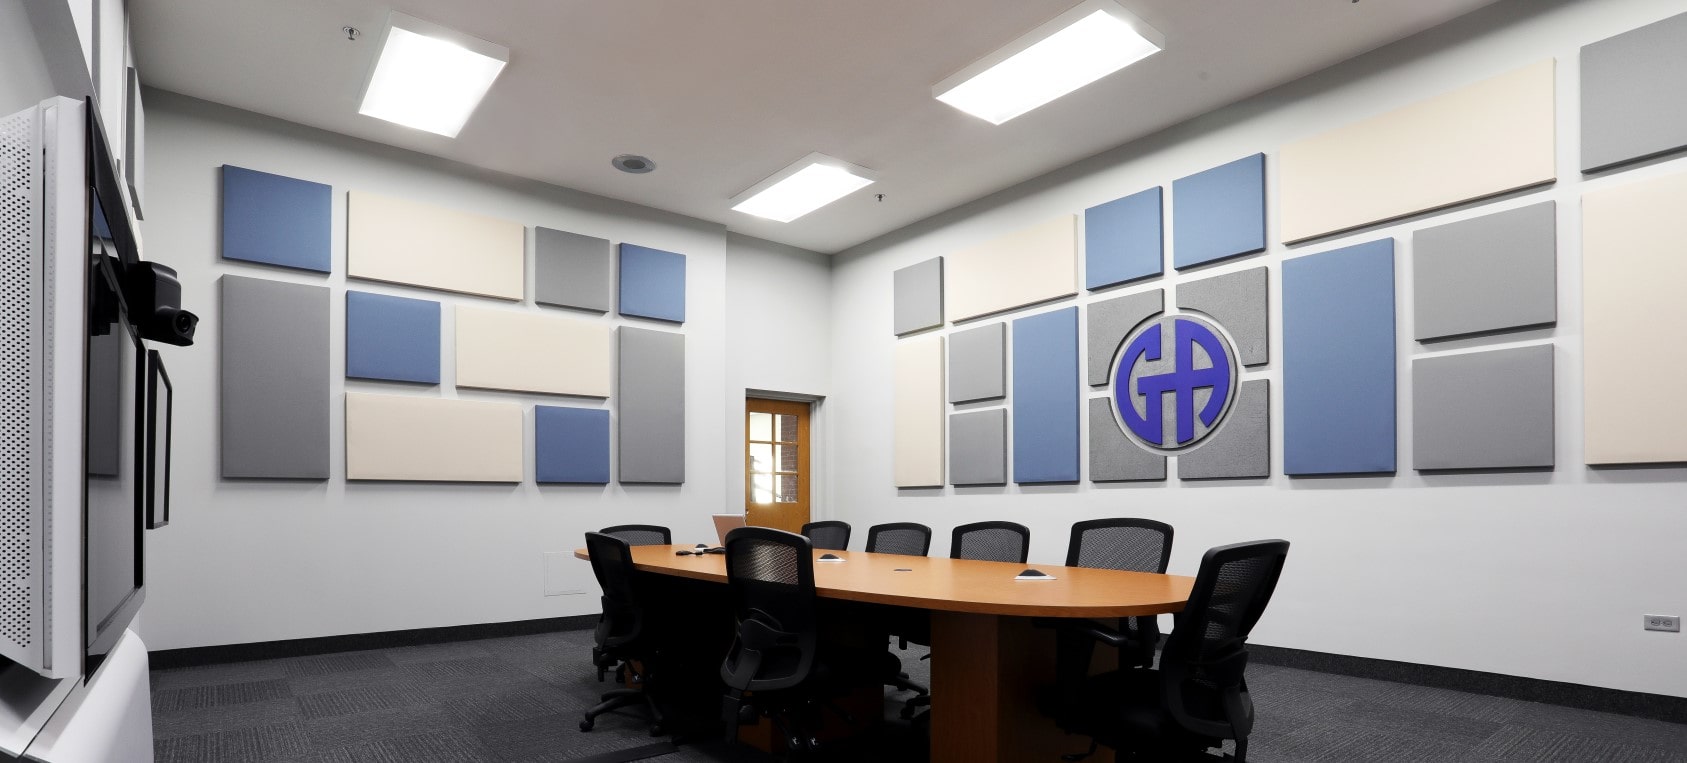 Acoustic Solutions for Offices